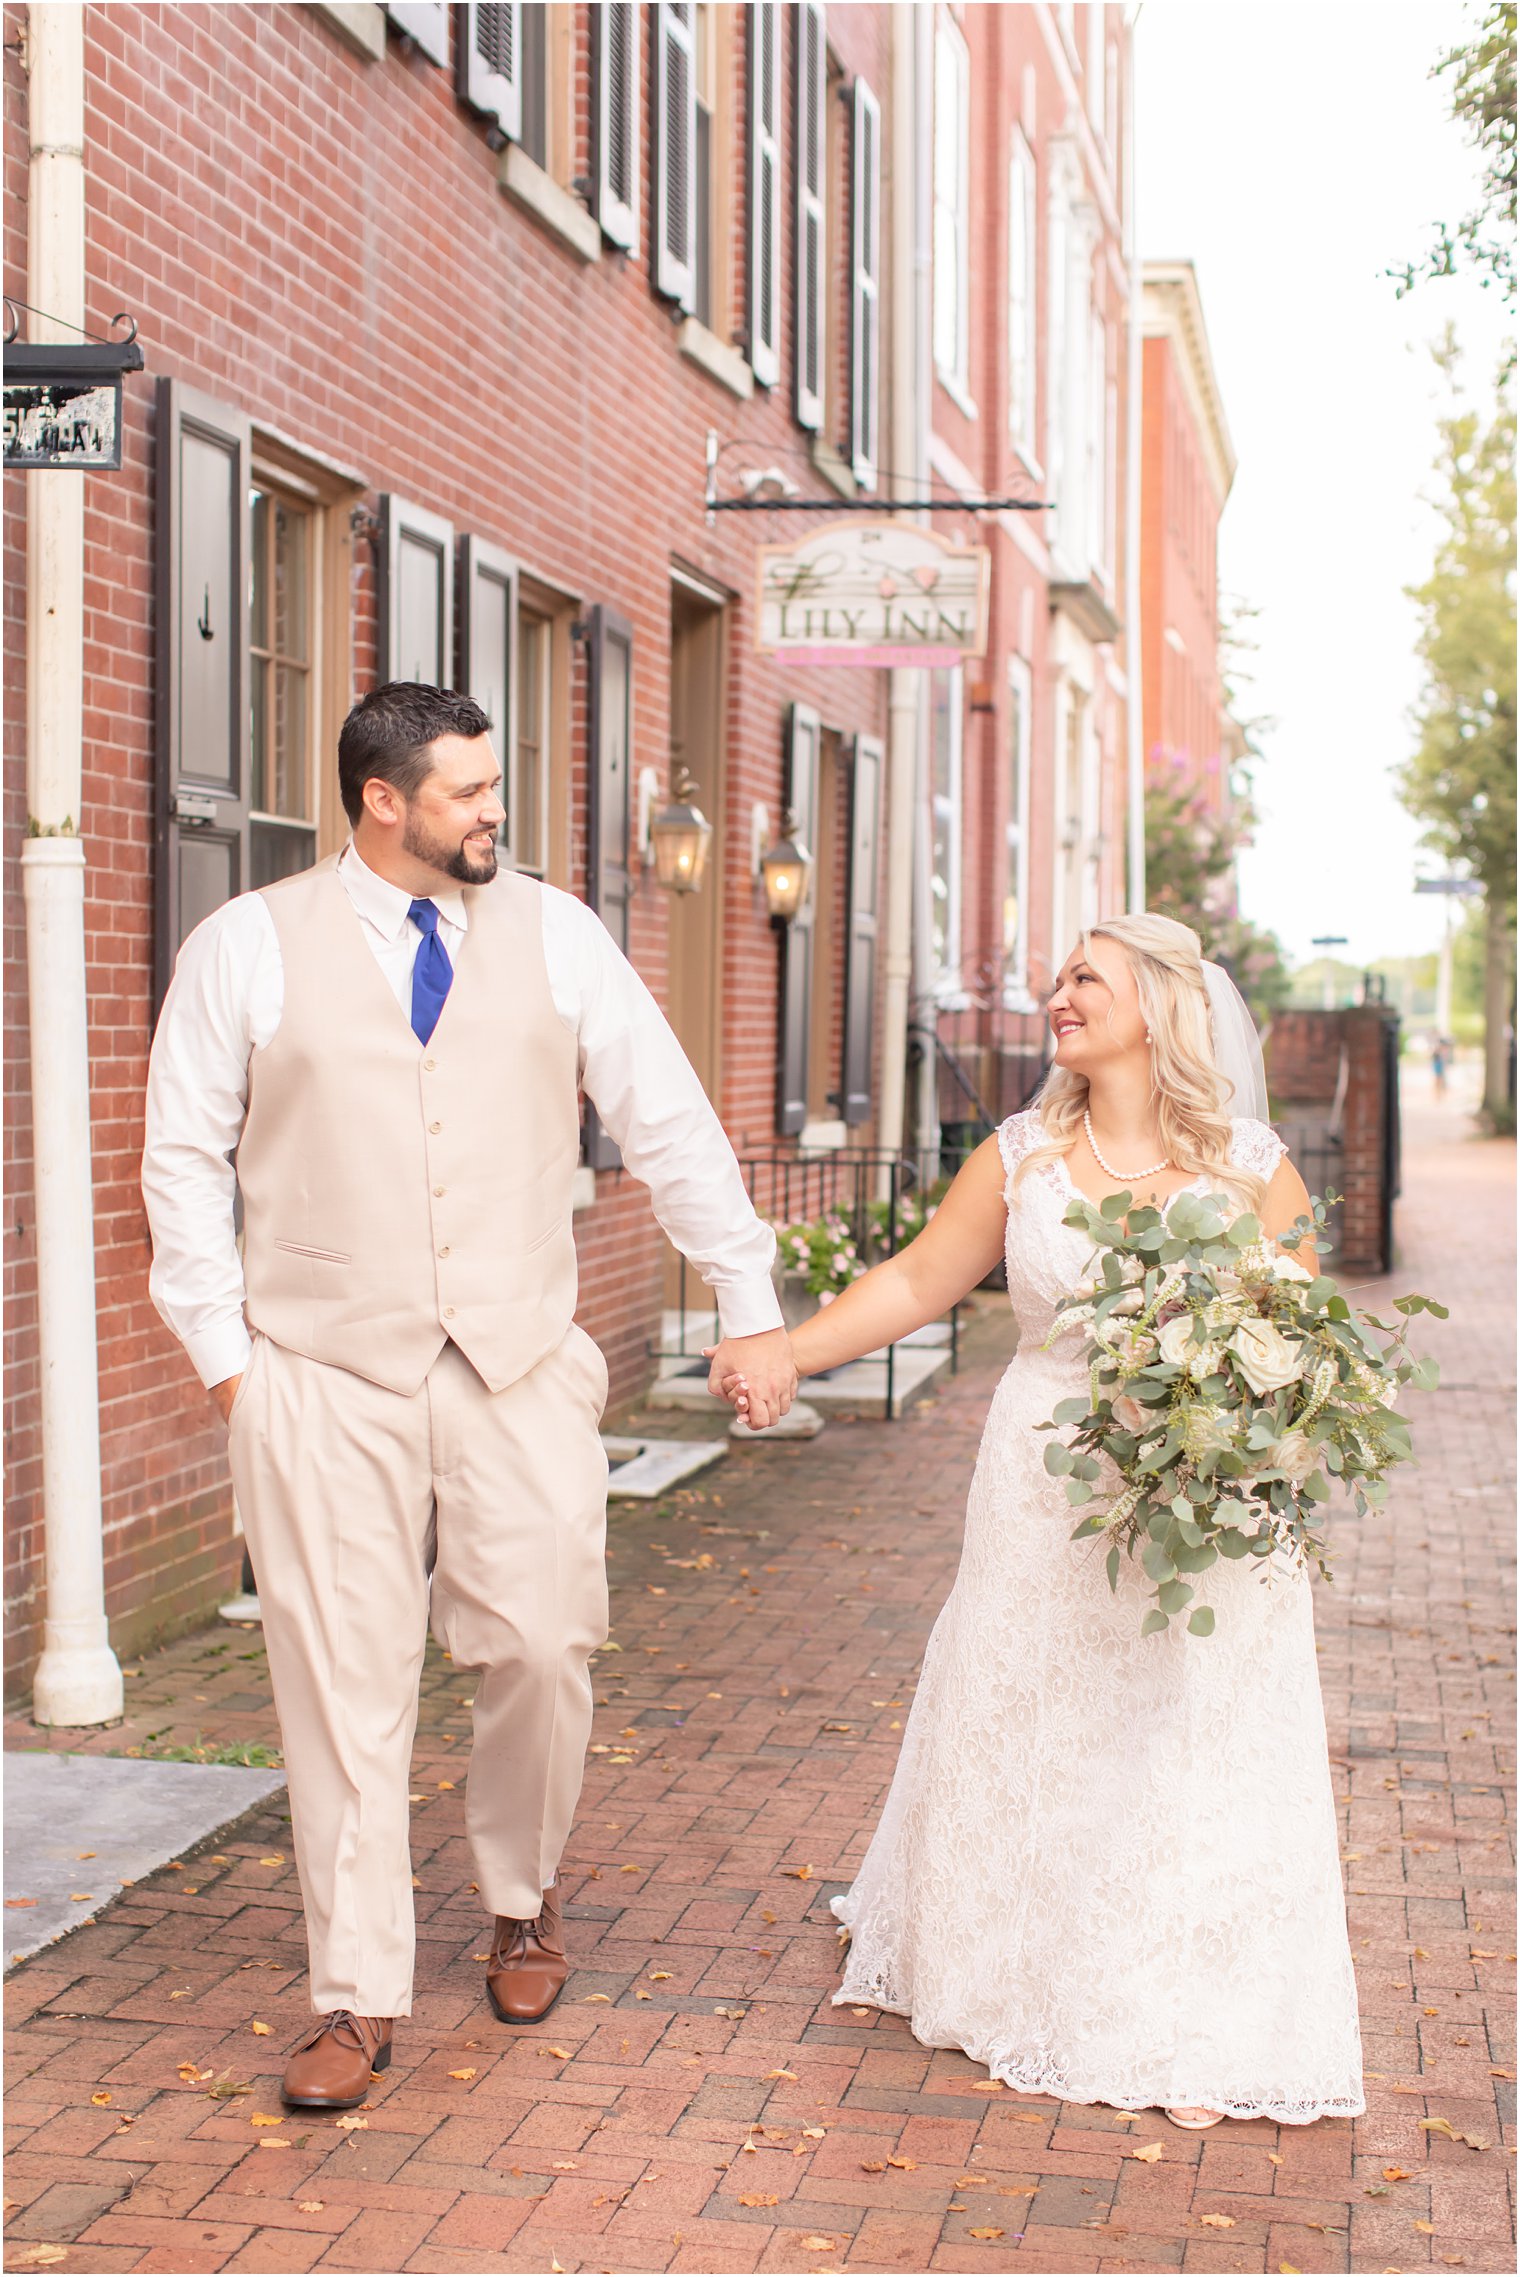 wedding portraits in New Jersey on sidewalk by The Lily Inn